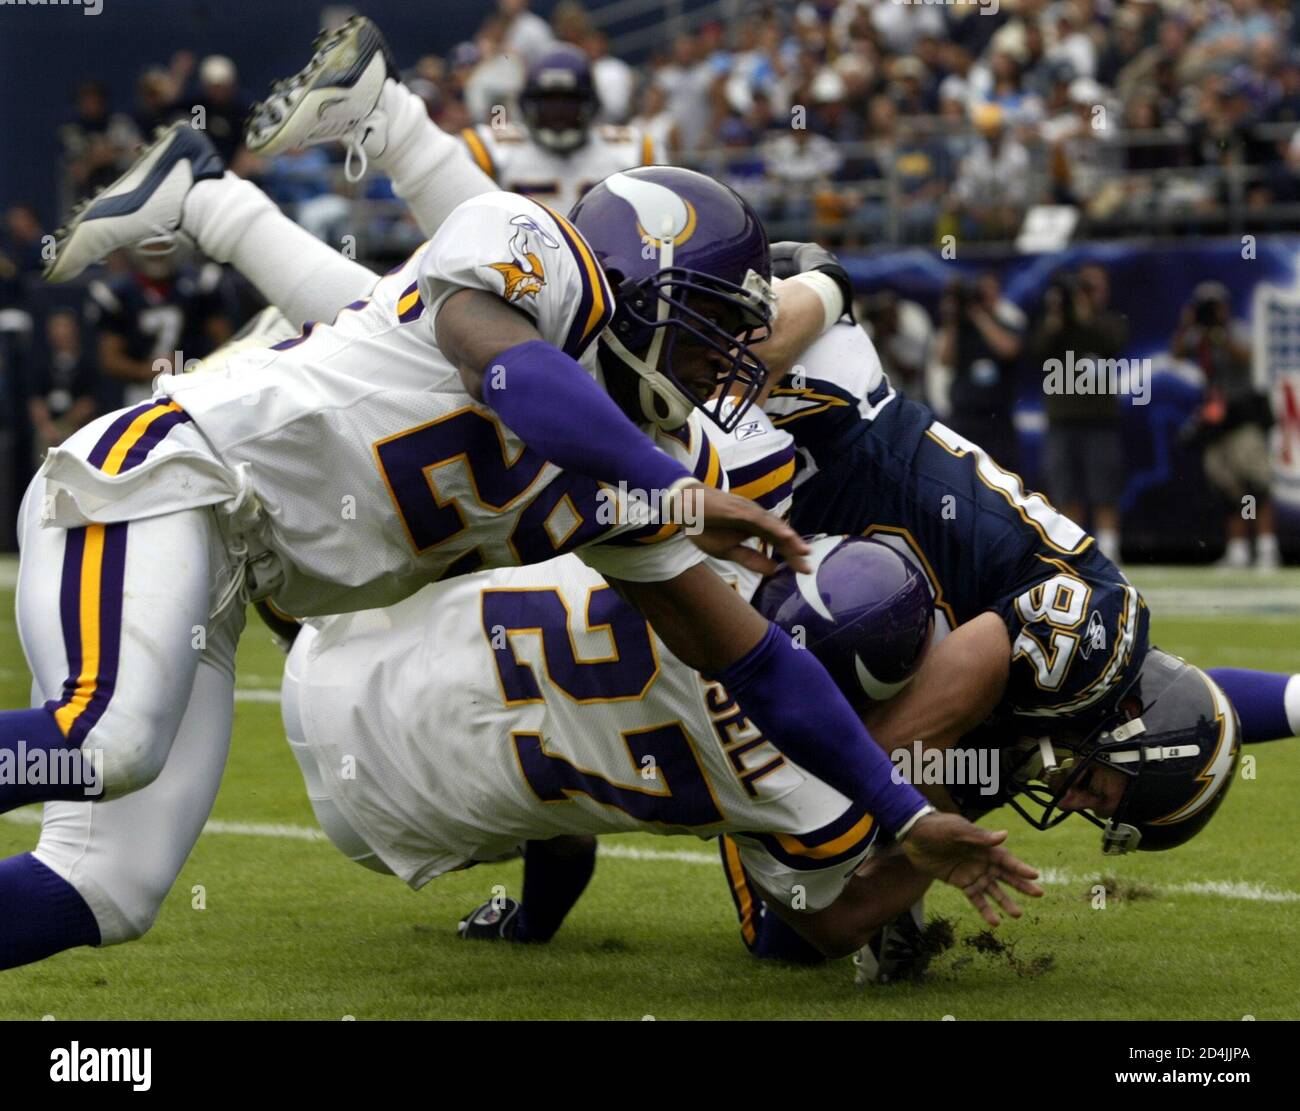 Minnesota Vikings Brian Russell (27) and Denard Williams upend San Diego Chargers wide receiver Tim Dwight (87) during NFL action at Qualcomm Stadium in San Diego, California, November 9, 2003. San Diego upset Minnesota, 42-28. REUTERS/Mike Blake  MB/GAC Stock Photo